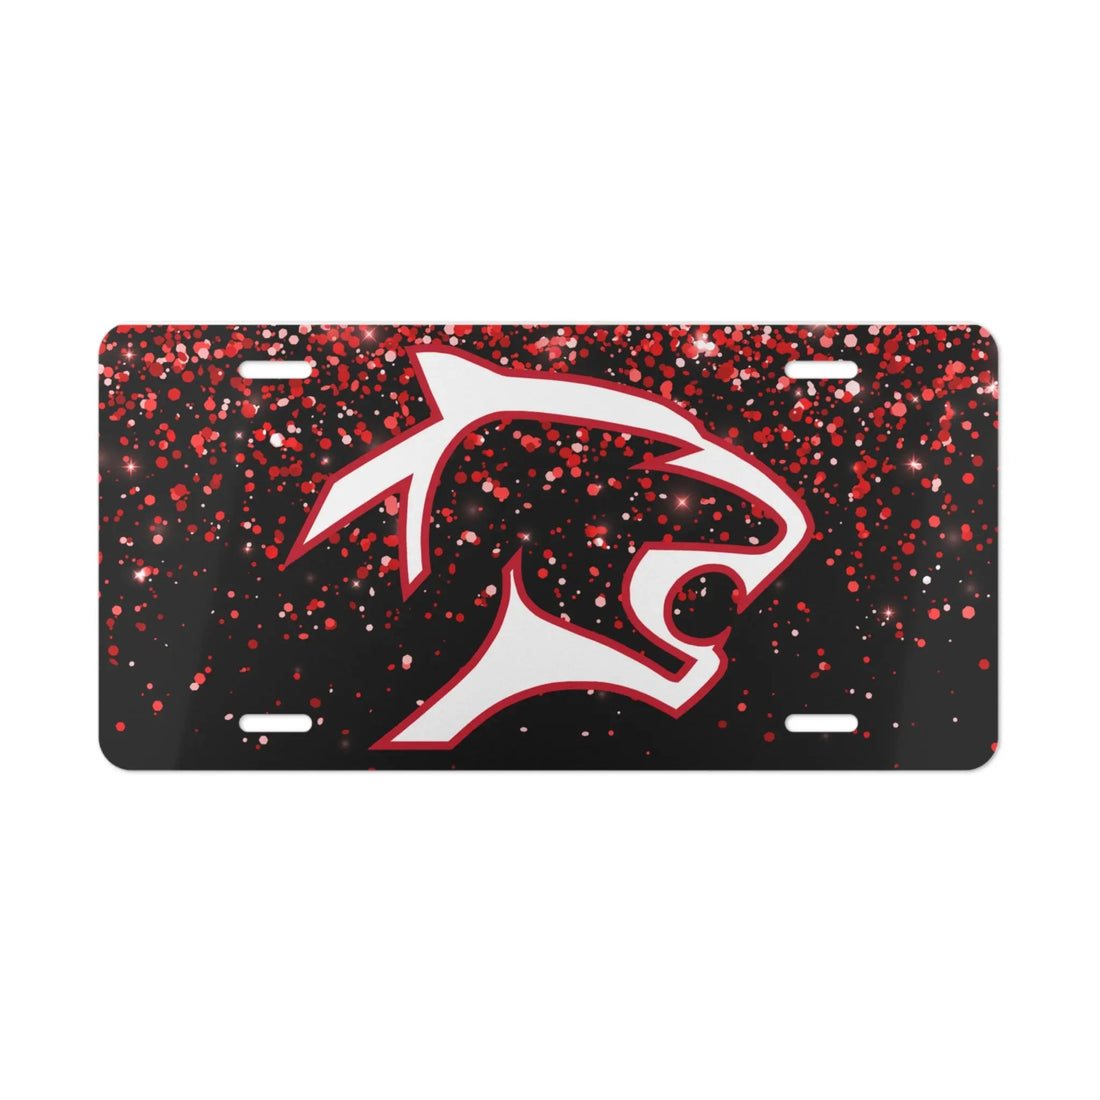 Red & Black Panthers Plate - Accessories - Positively Sassy - Red & Black Panthers Plate